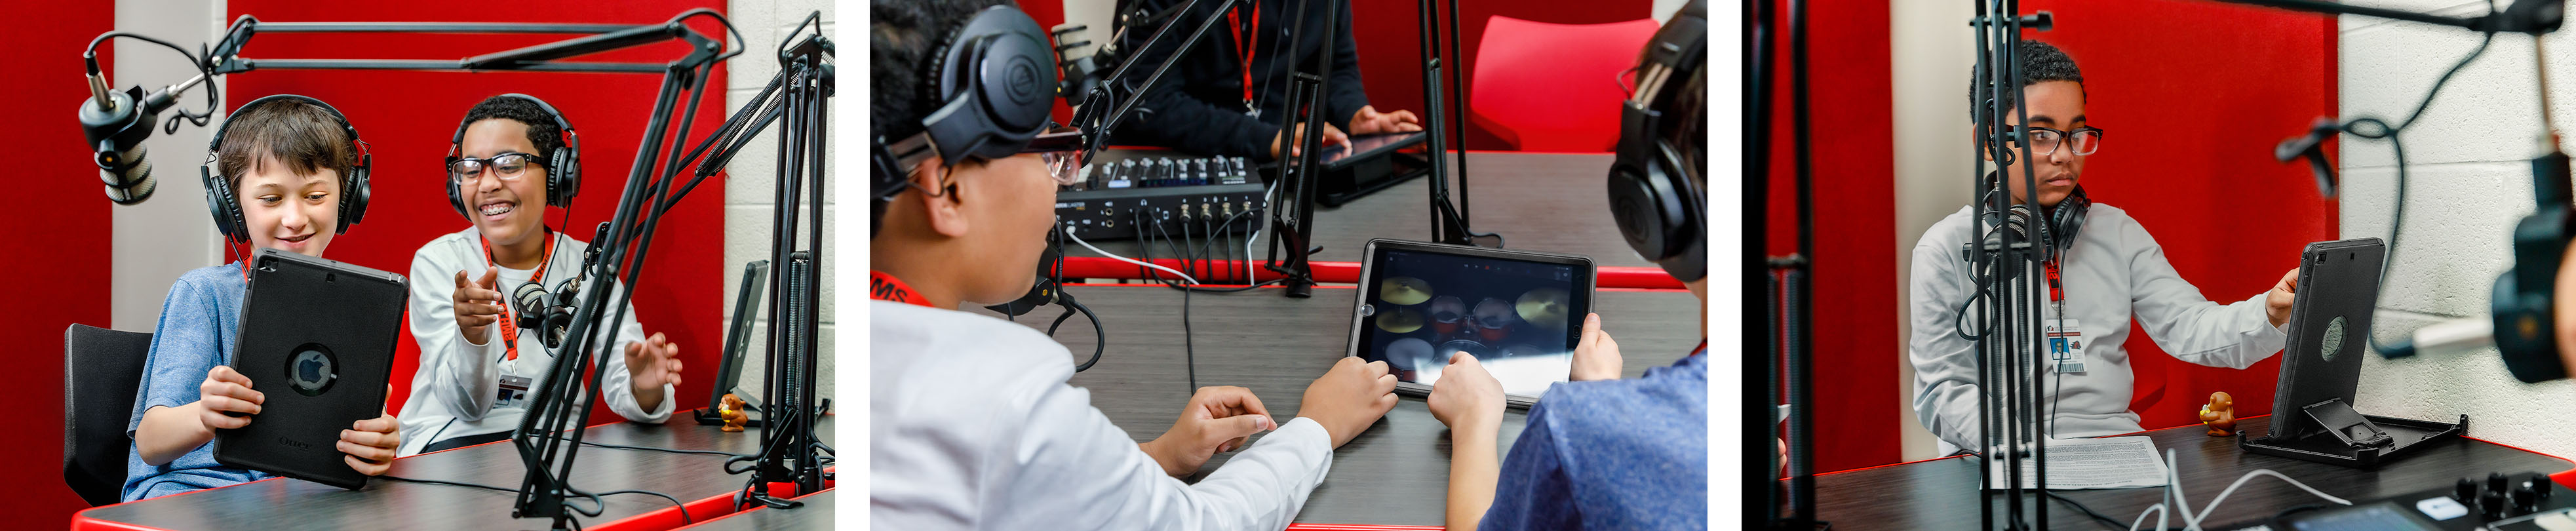 Kids in a recording studio using a tablet